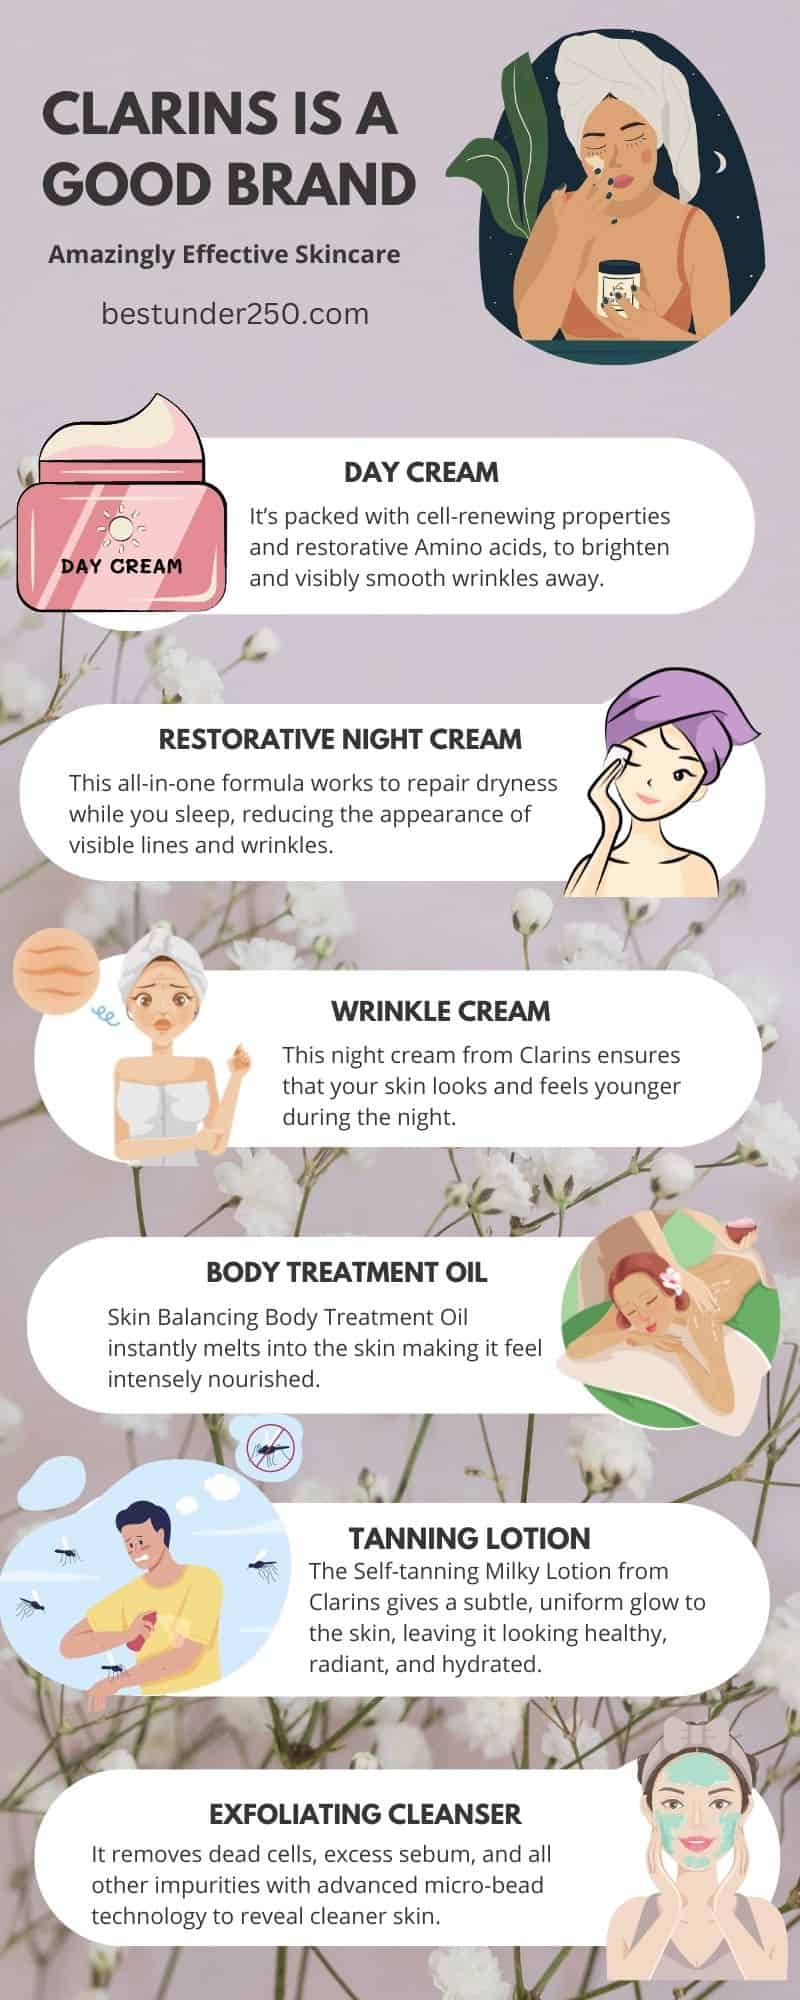 Infographic - Clarins is a good skincare brand